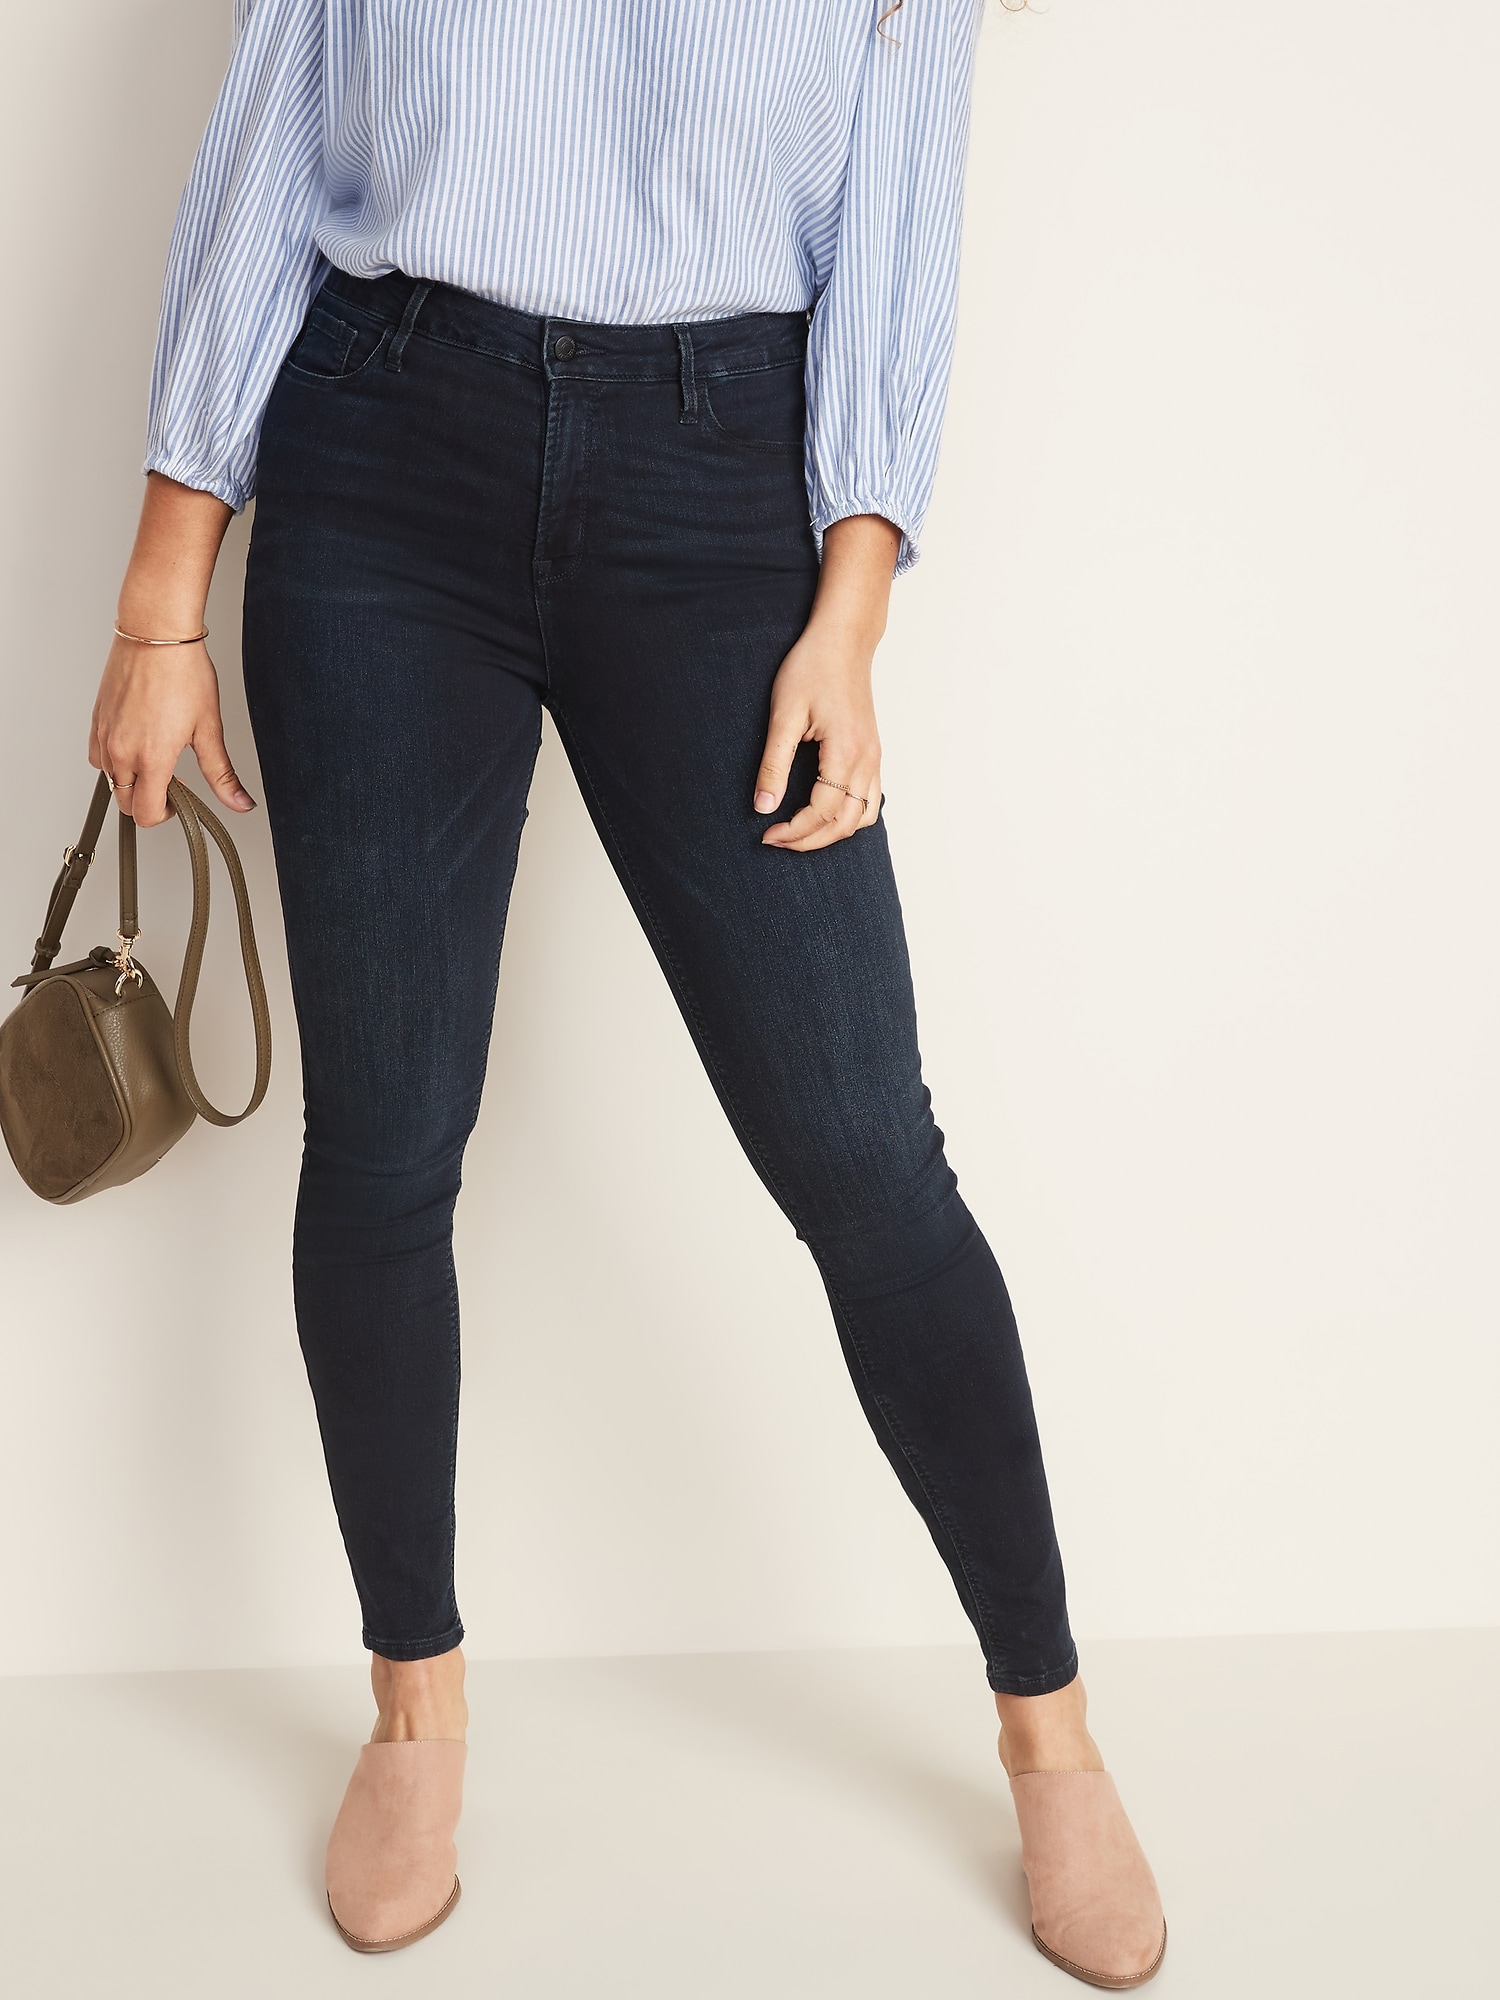 old navy tummy control jeans